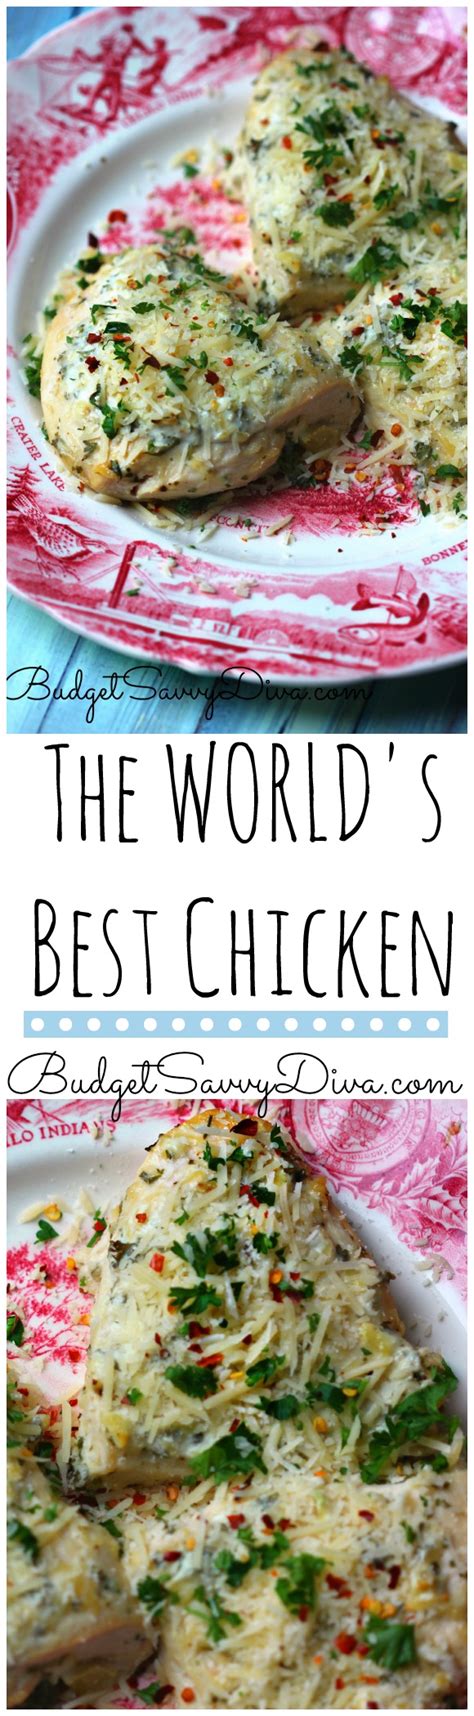 It is a very rich, flavorful, and filling meal, and it pairs well with almost any side dish. The World's Best Chicken Recipe - Budget Savvy Diva